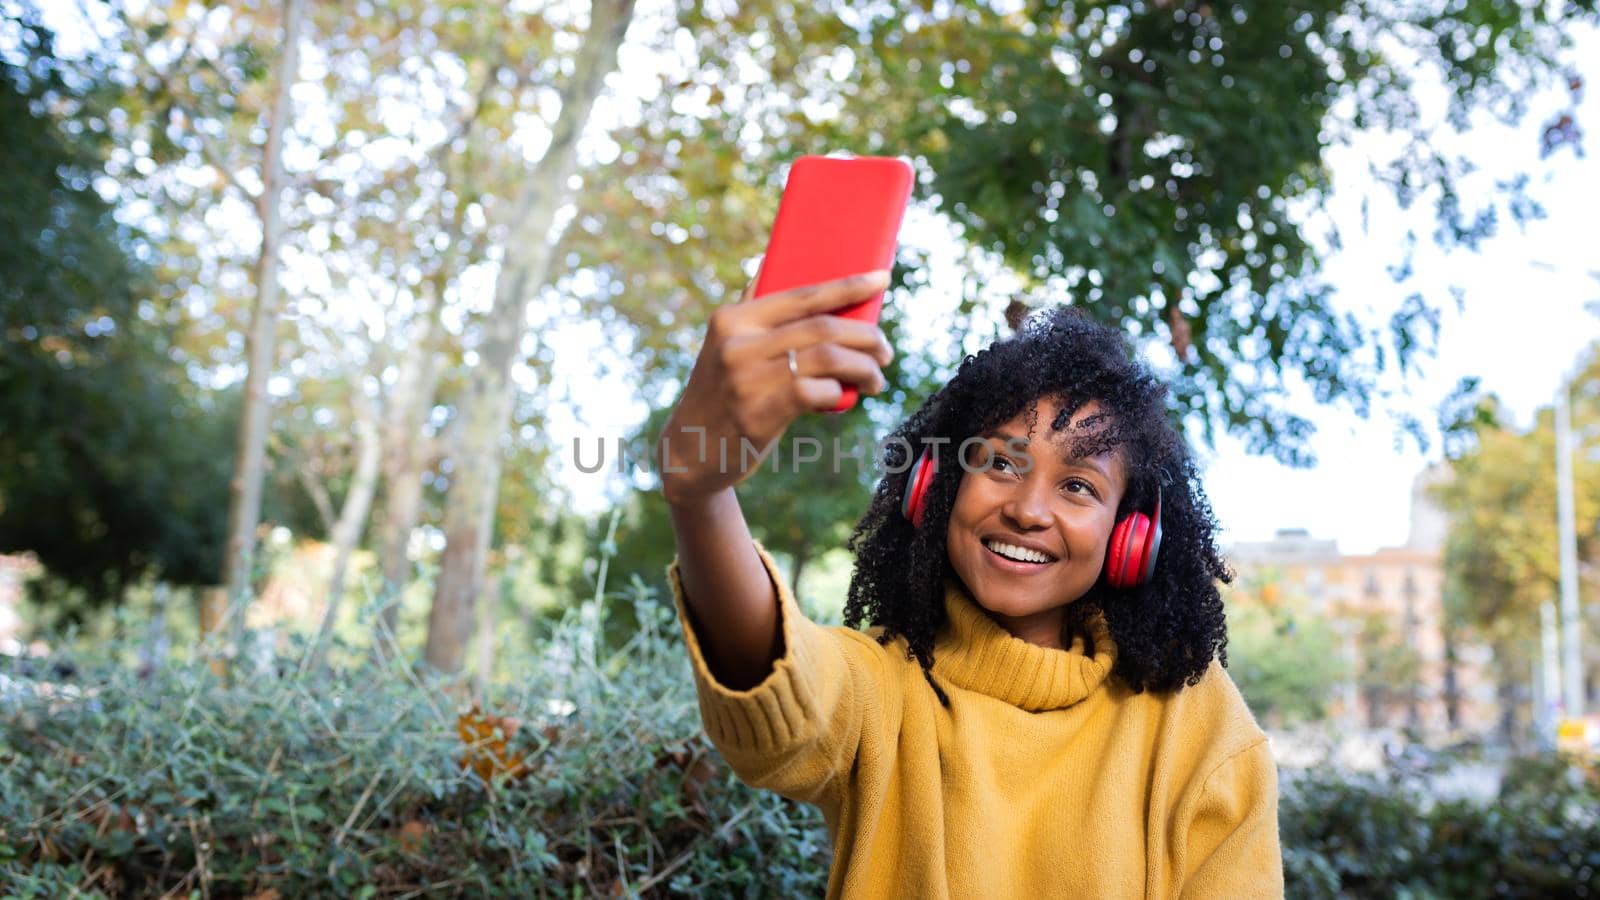 Panoramic image of young African American woman taking a selfie with smartphone in a park. Copy space. by Hoverstock